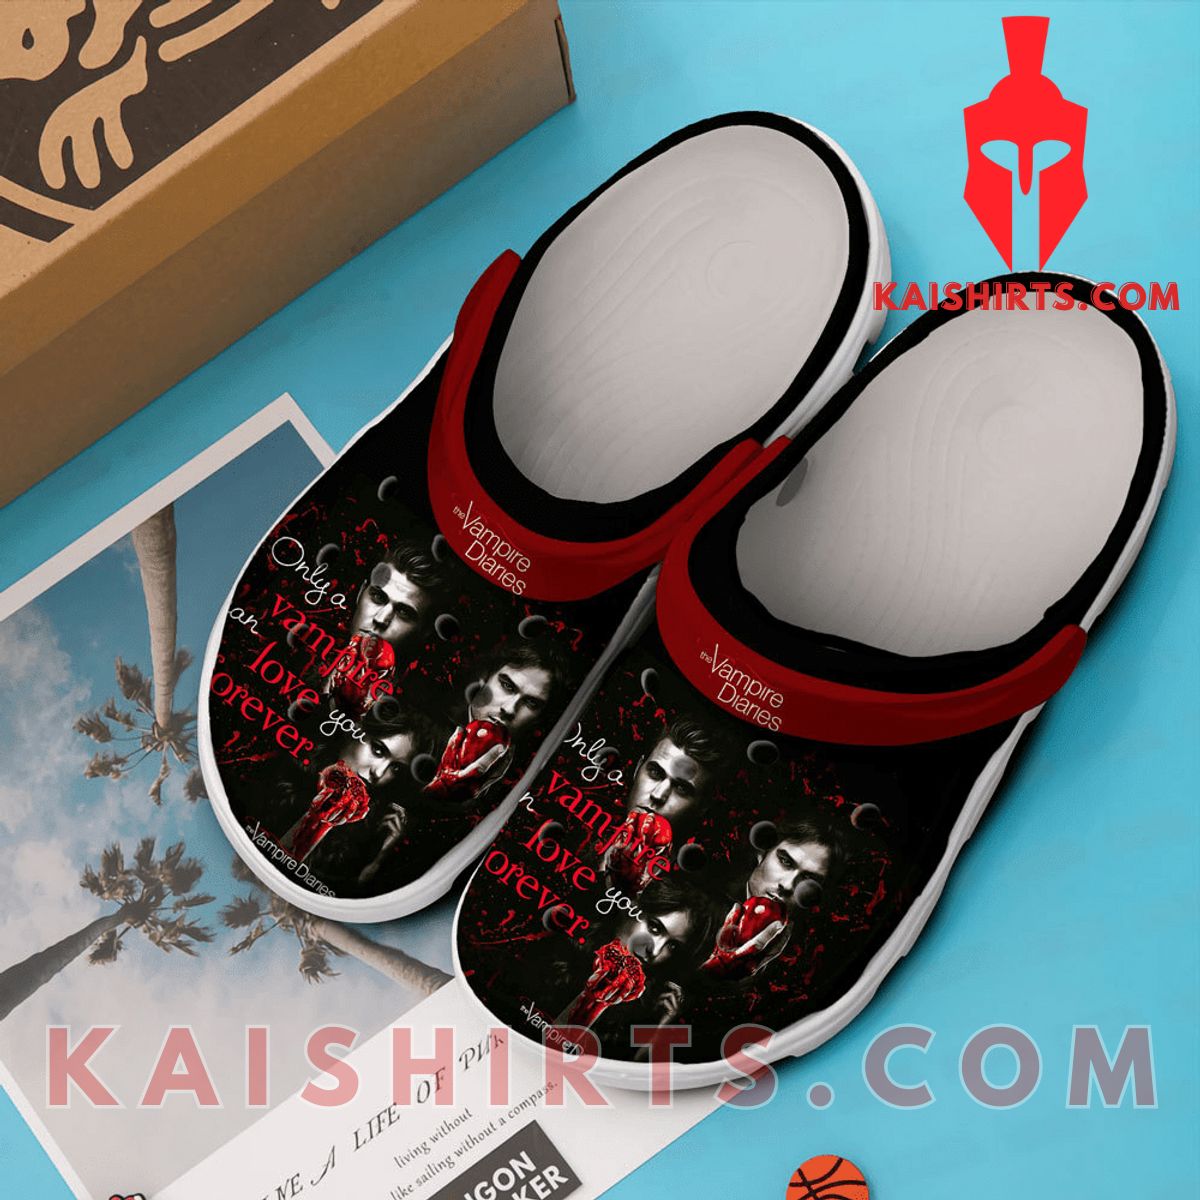 The Vampire Diaries Movie Clogband Crocs Shoes